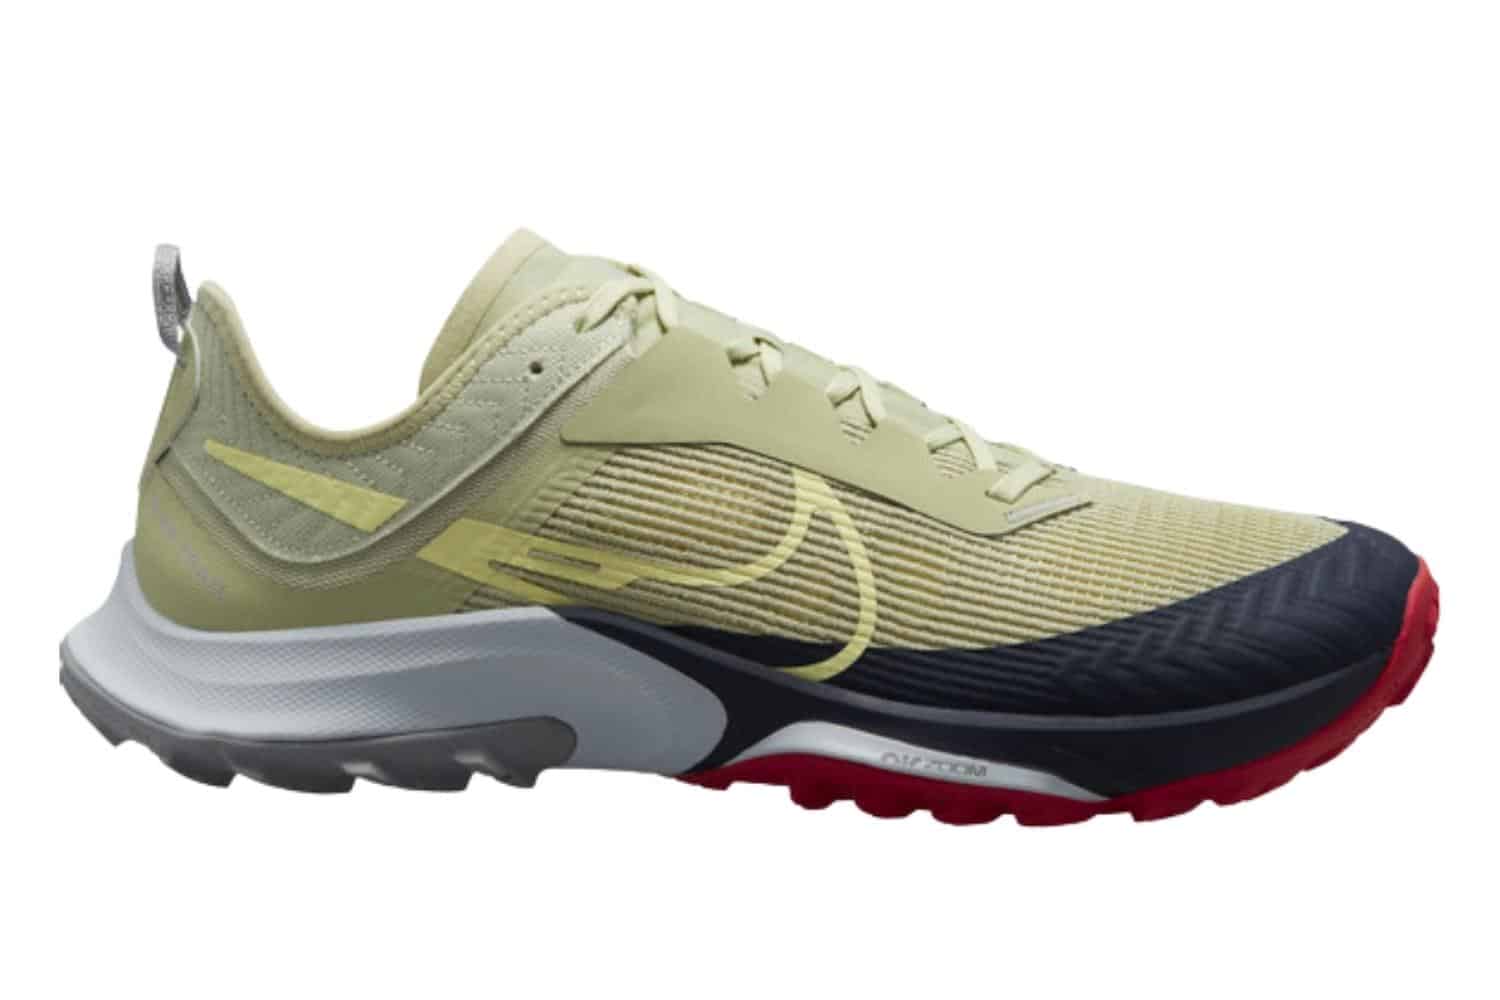 Nike Air Zoom Terra Kiger 8 Review (2022): Should You Get It?